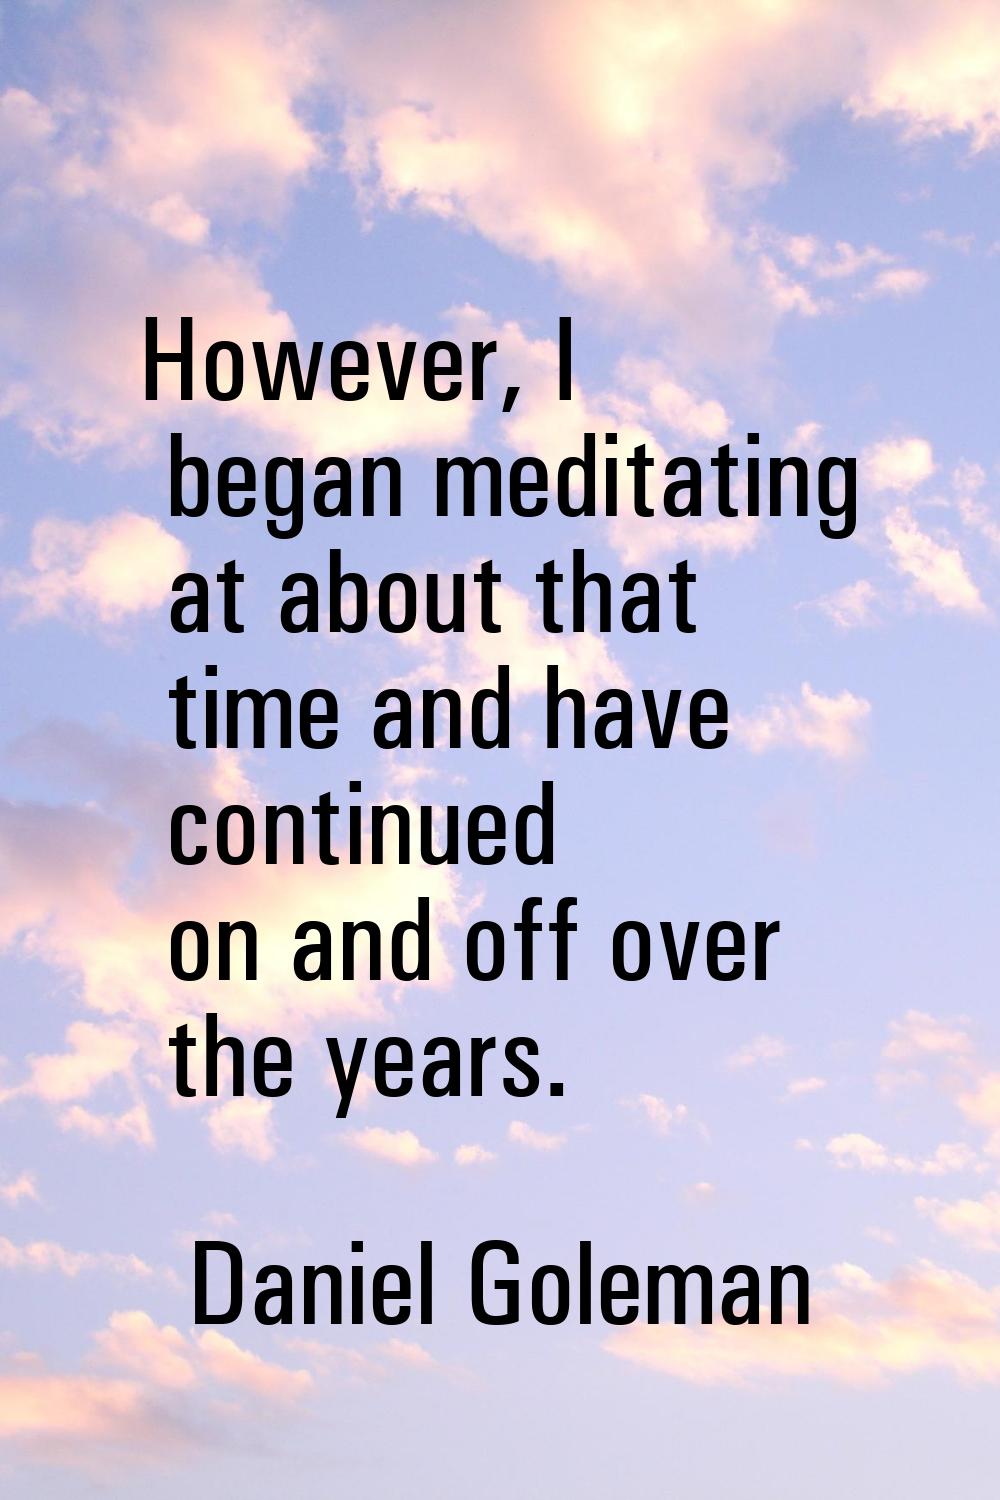 However, I began meditating at about that time and have continued on and off over the years.